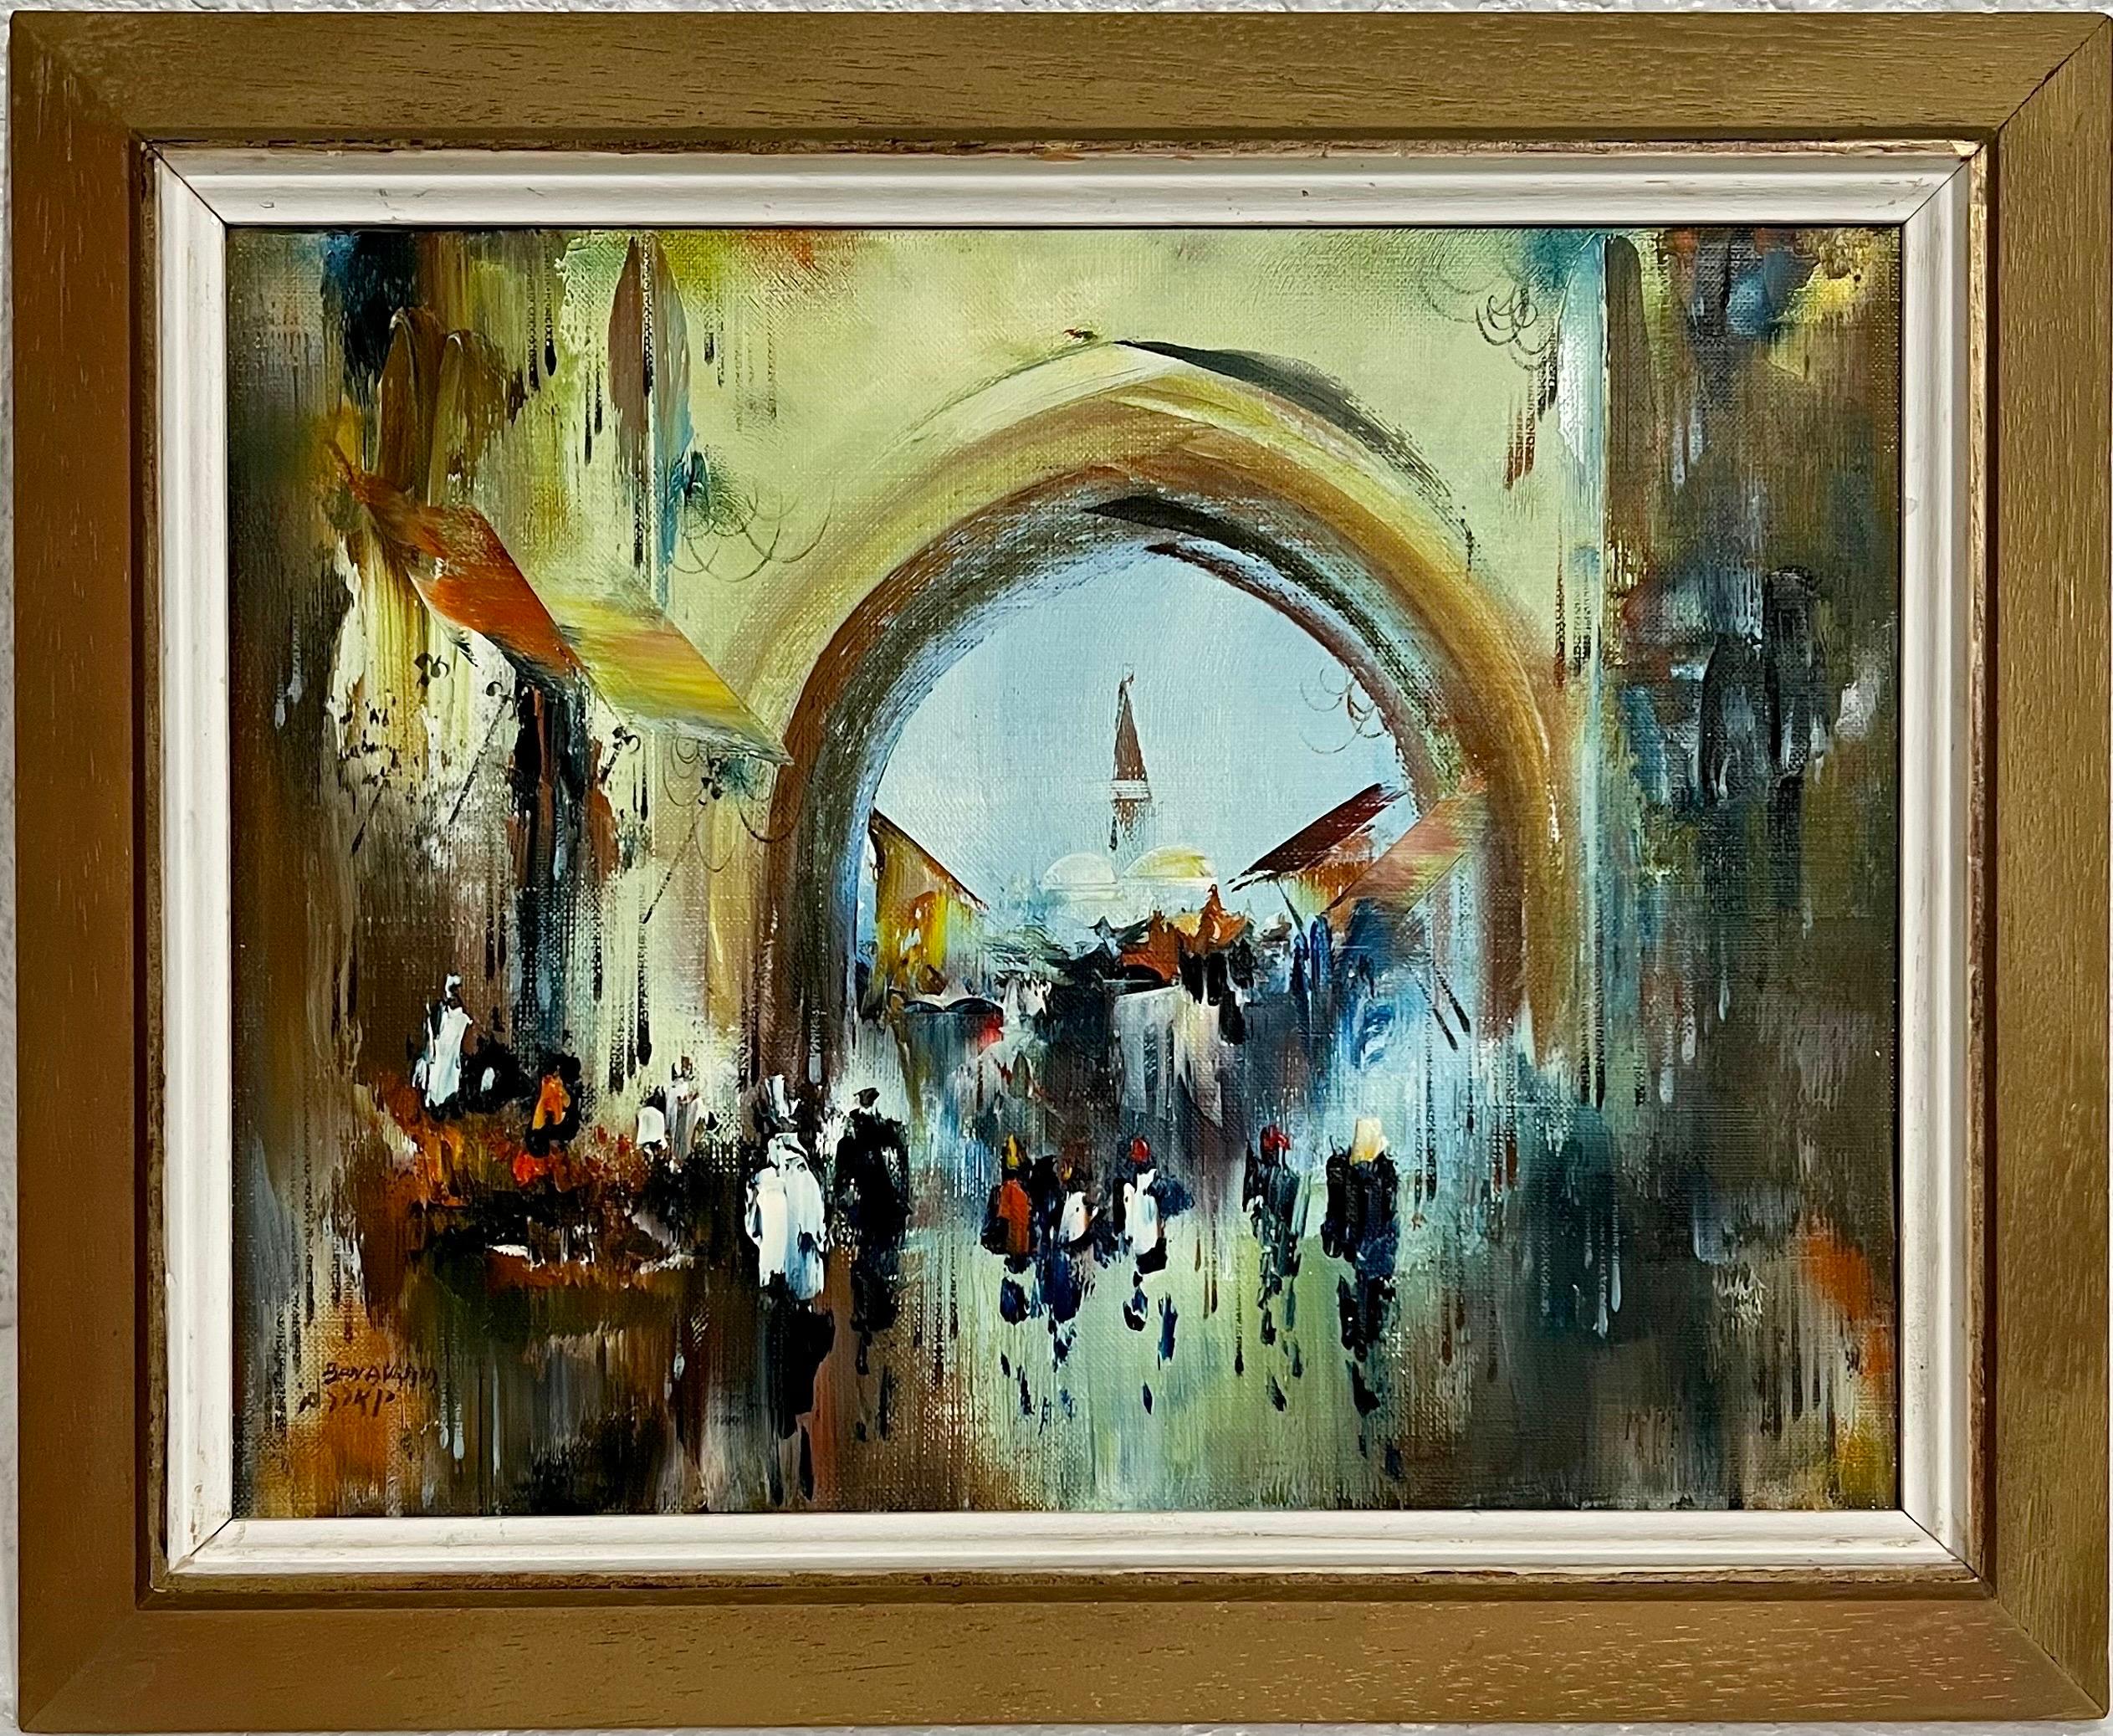 Jerusalem Israeli landscape cityscape with the Har Habayit, The Western Wall plazas. Kotel Hamaaravi.
Size includes frame. canvas is 11 X 14

Edward Ben Avram (born 1941) is an Indian - Israeli artist who was born in Bombay, India and immigrated to